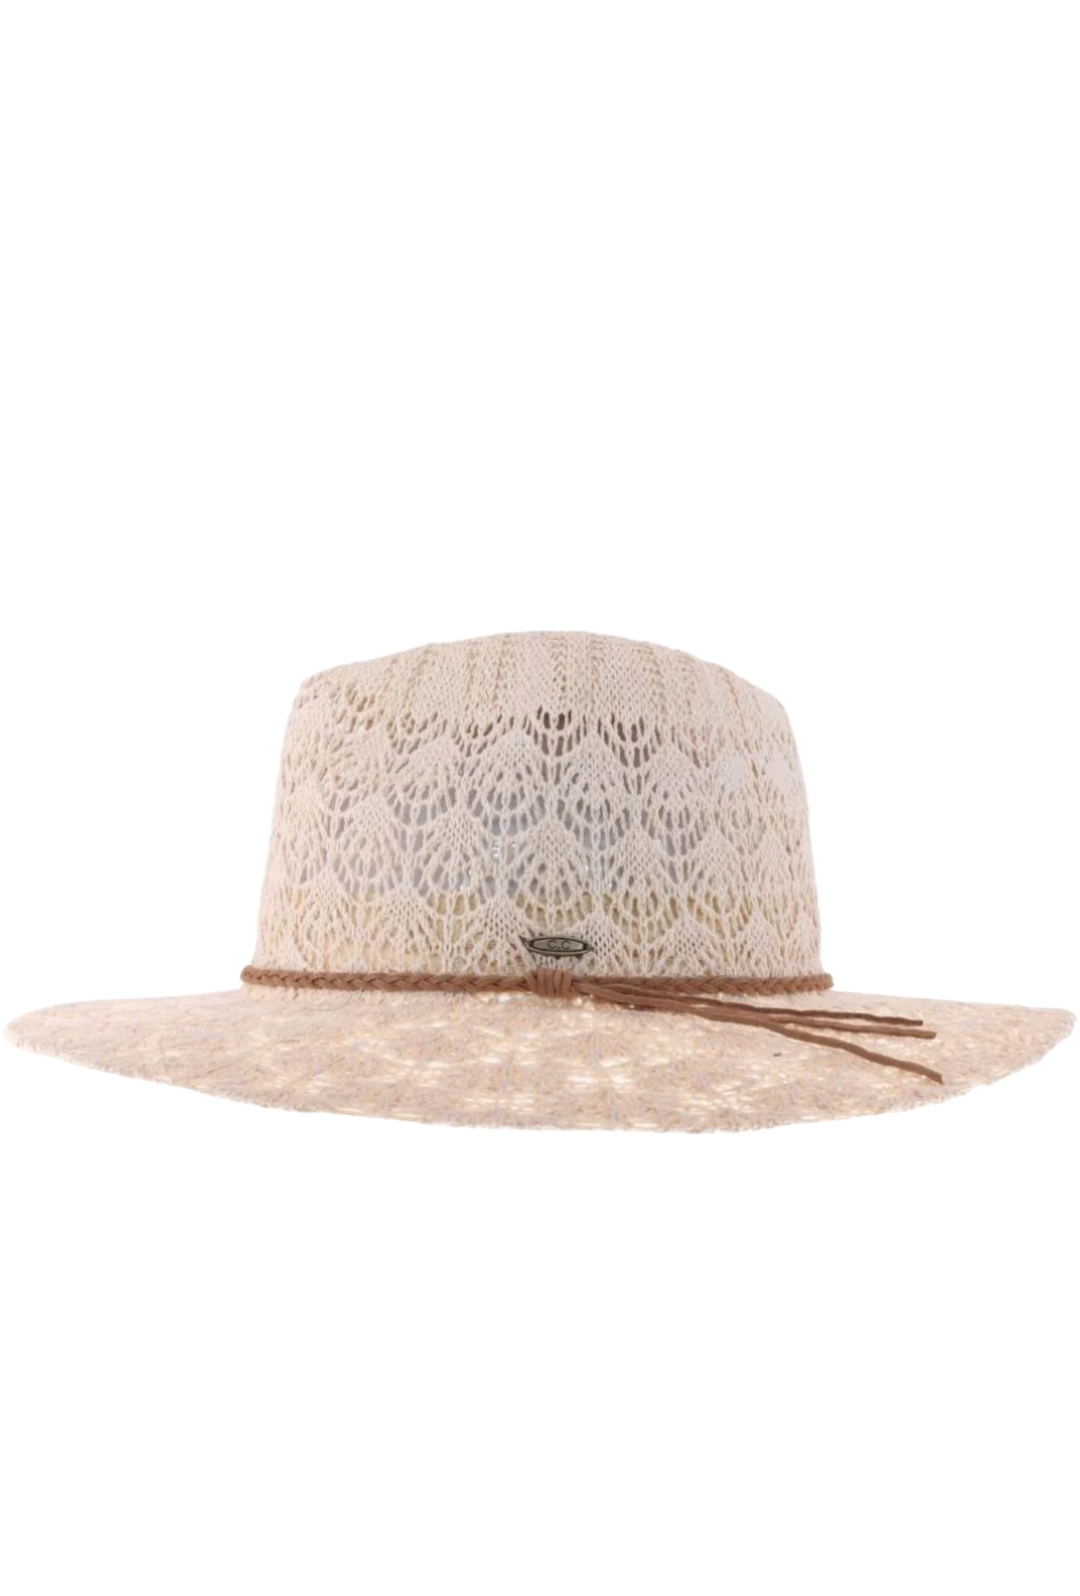 Horseshoe Lace Knit with Braided Suede Trim Panama Hat- Beige